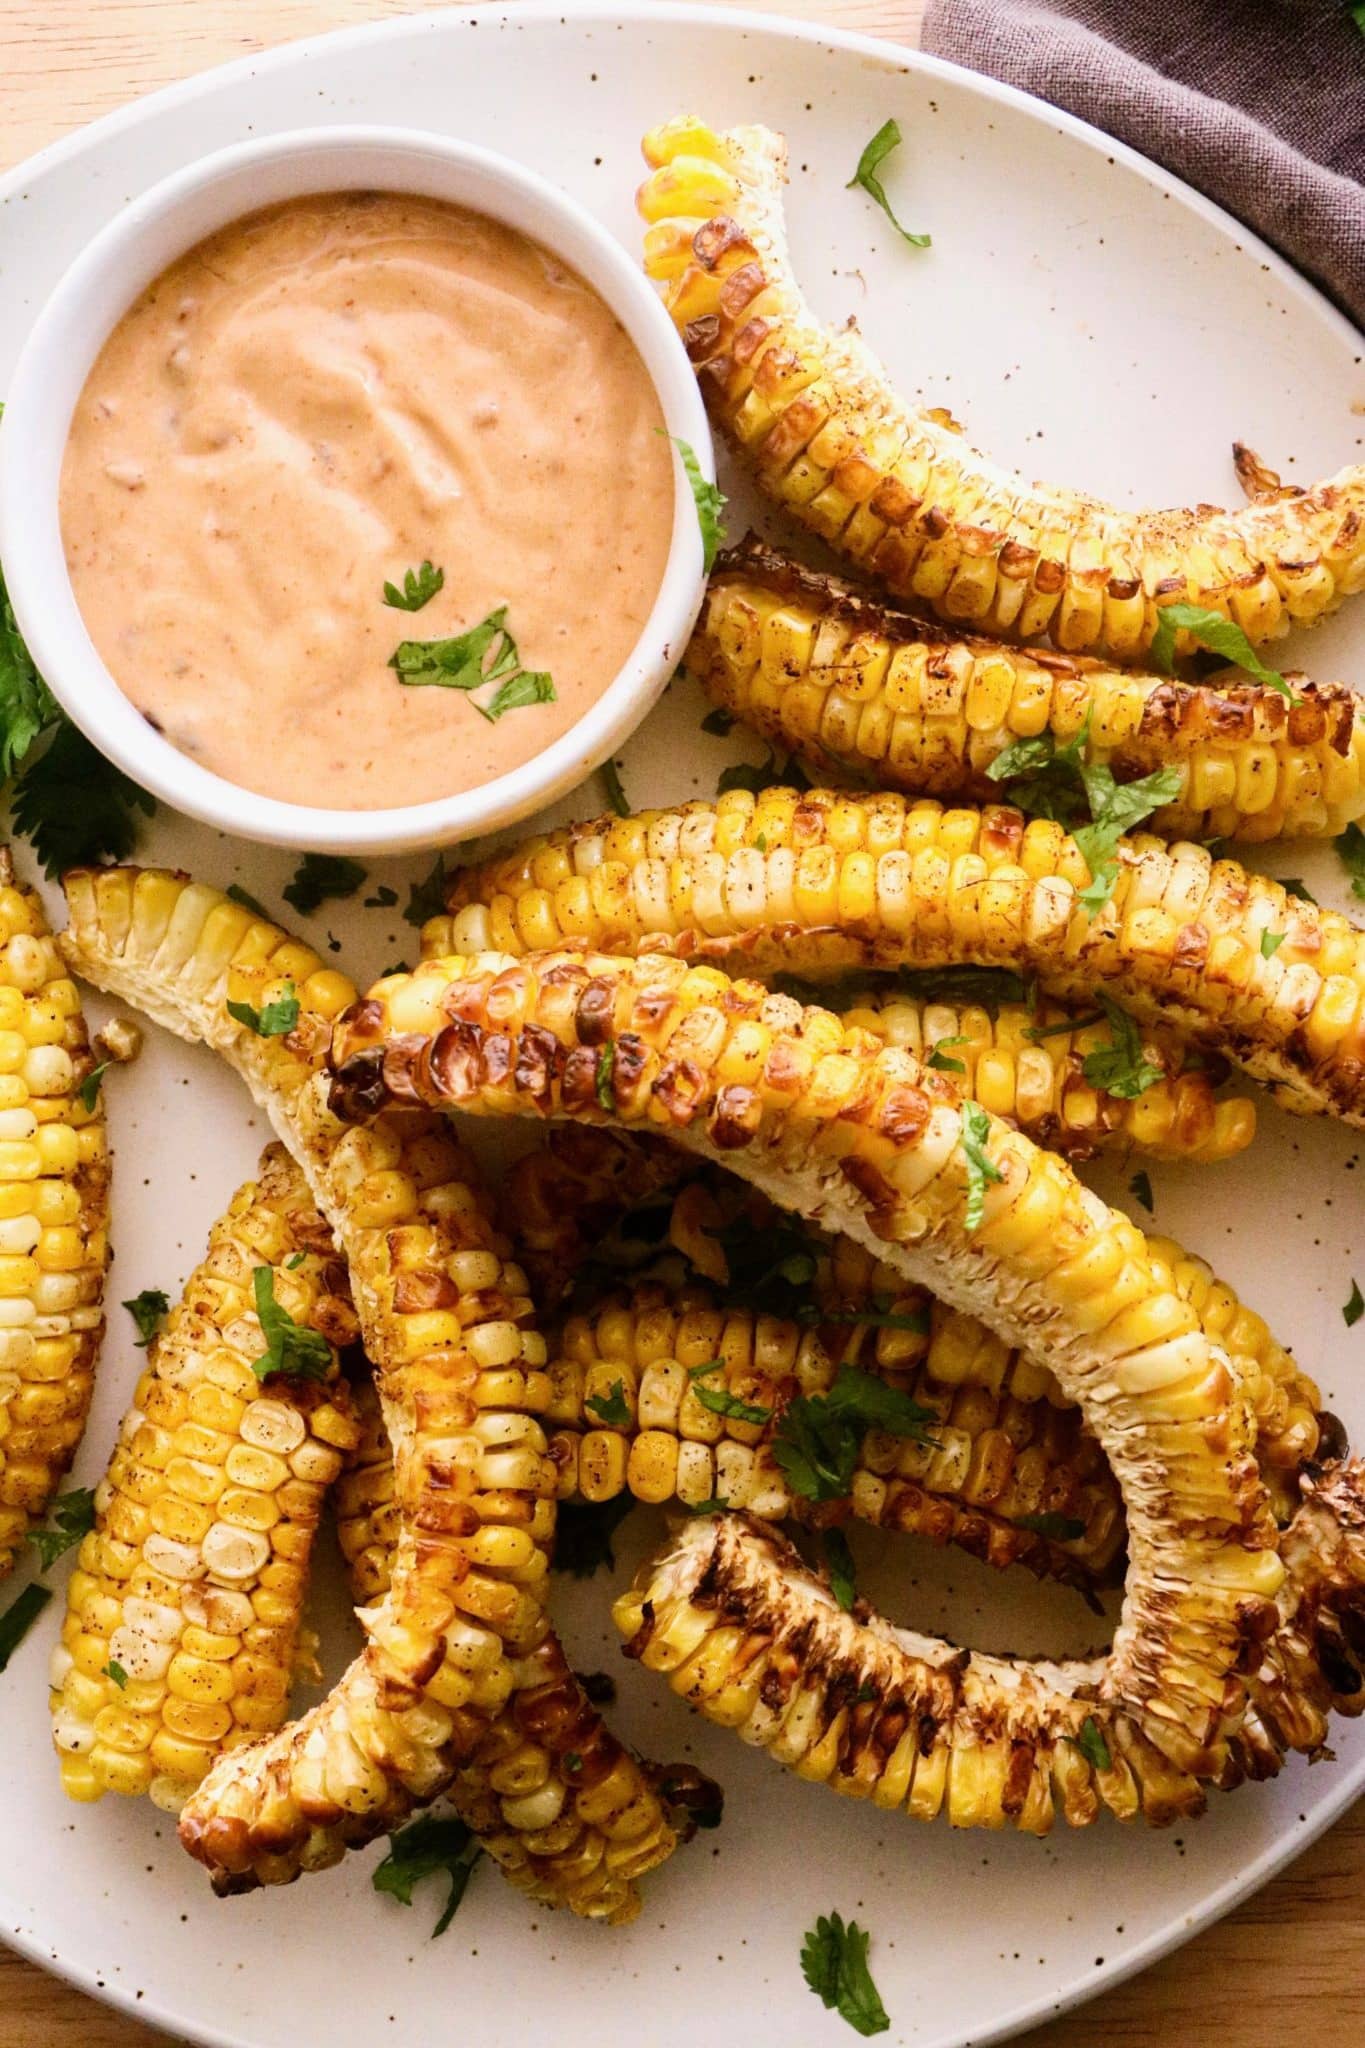 Seasoned corn ribs served with Chipotle dip on a plate.